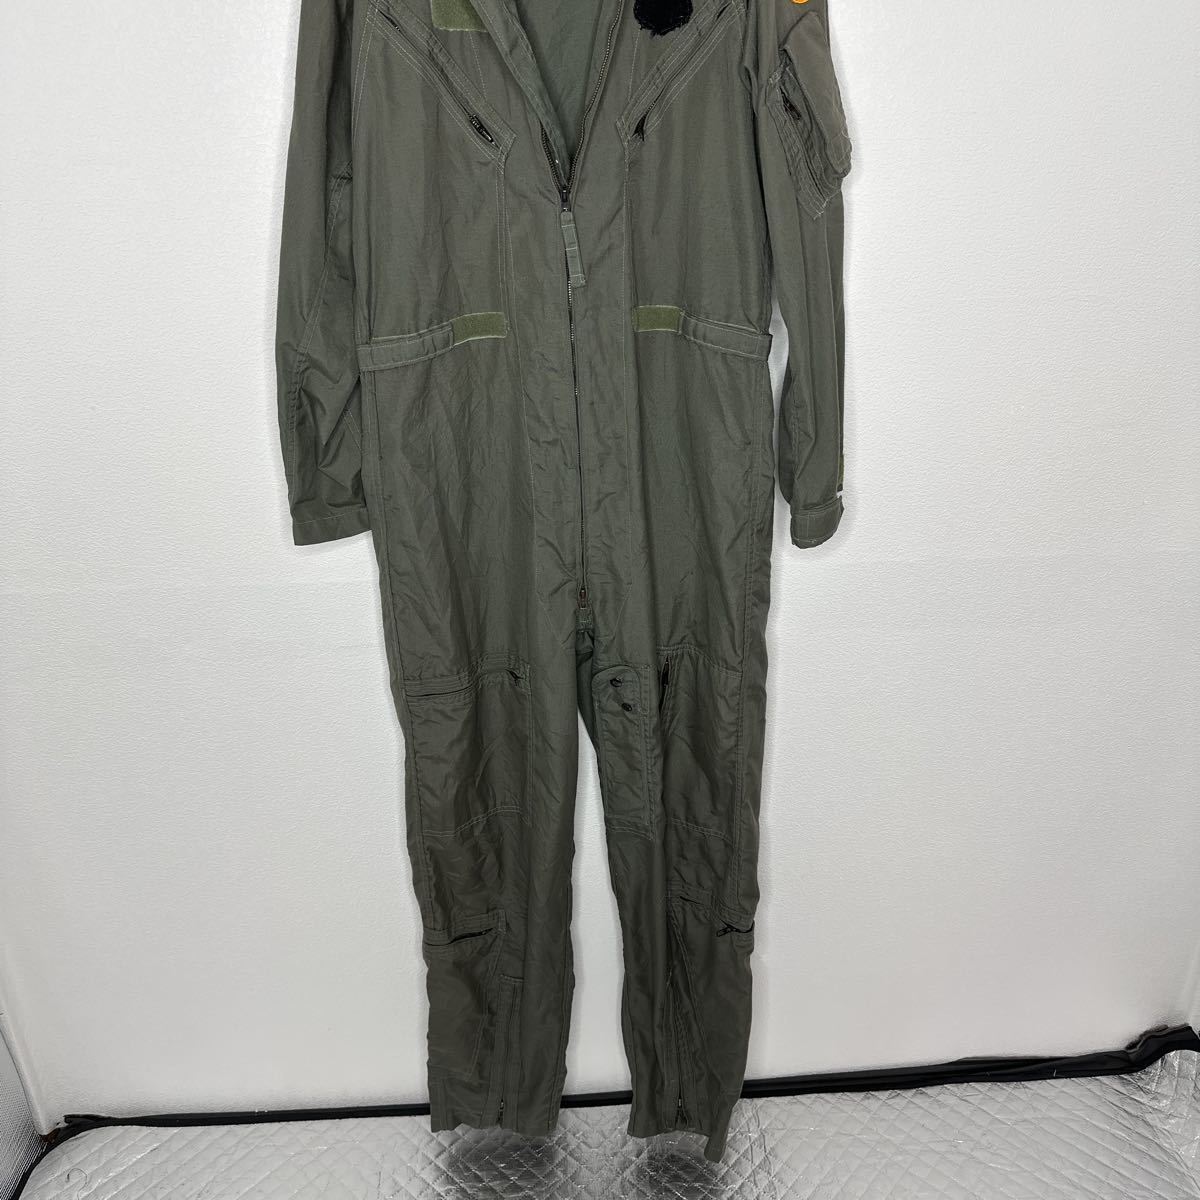 COVERALLS,FLYERS, SUMMER, FIRE RESISTANT CWU-27/P ■NO.6011-92■8415-01-043-8390 ■100% NON-MELTING AROMATIC 米軍 フライトスーツ 1_画像2